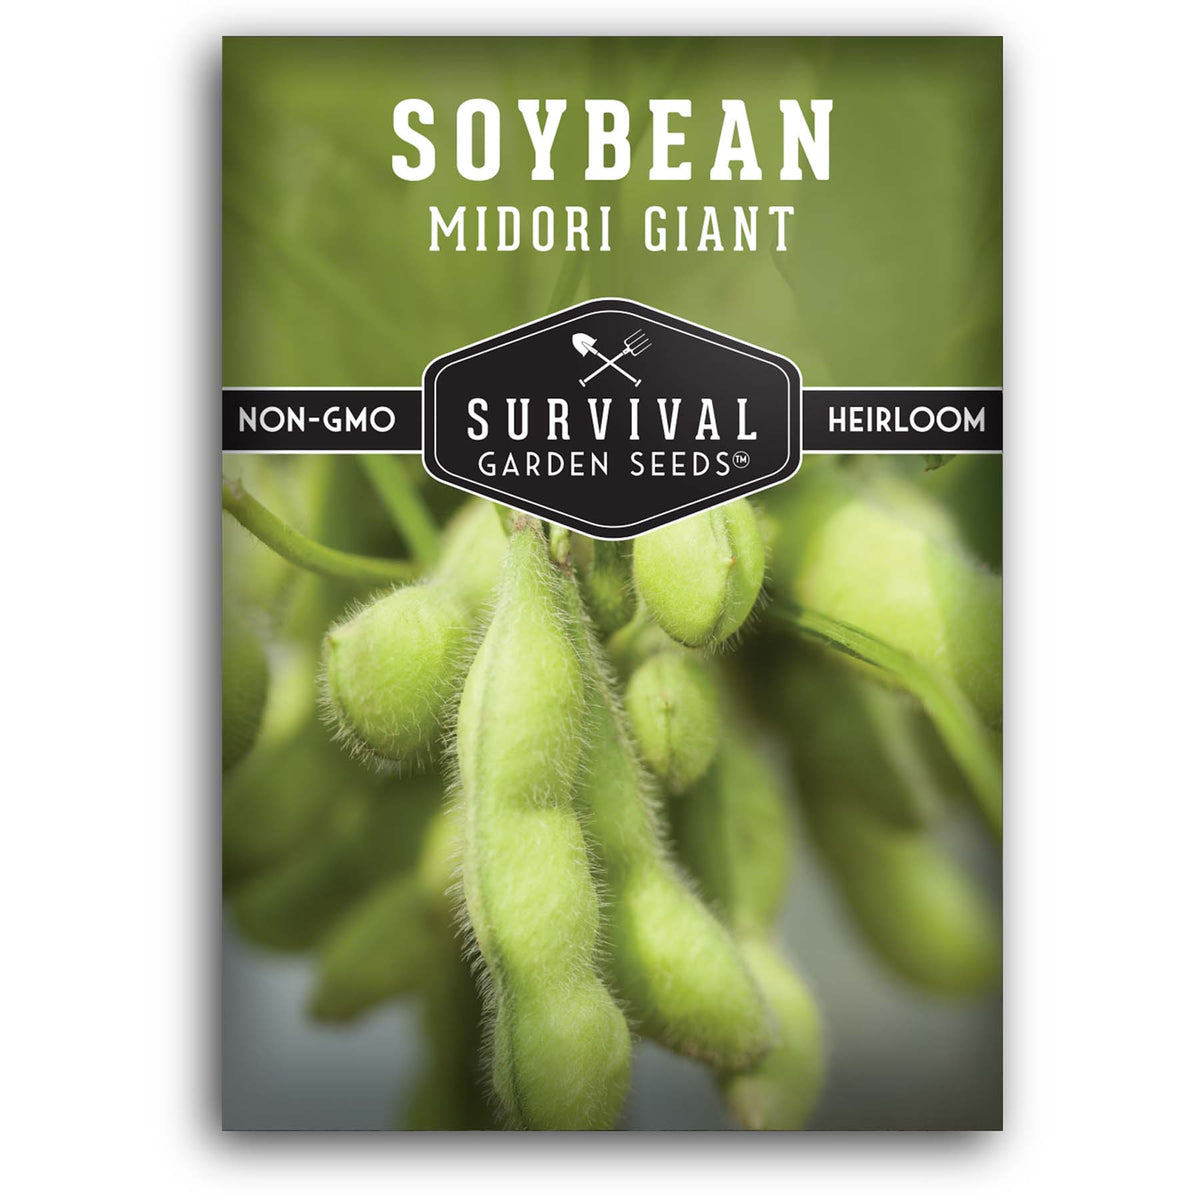 Midori Giant Soybean seeds for planting